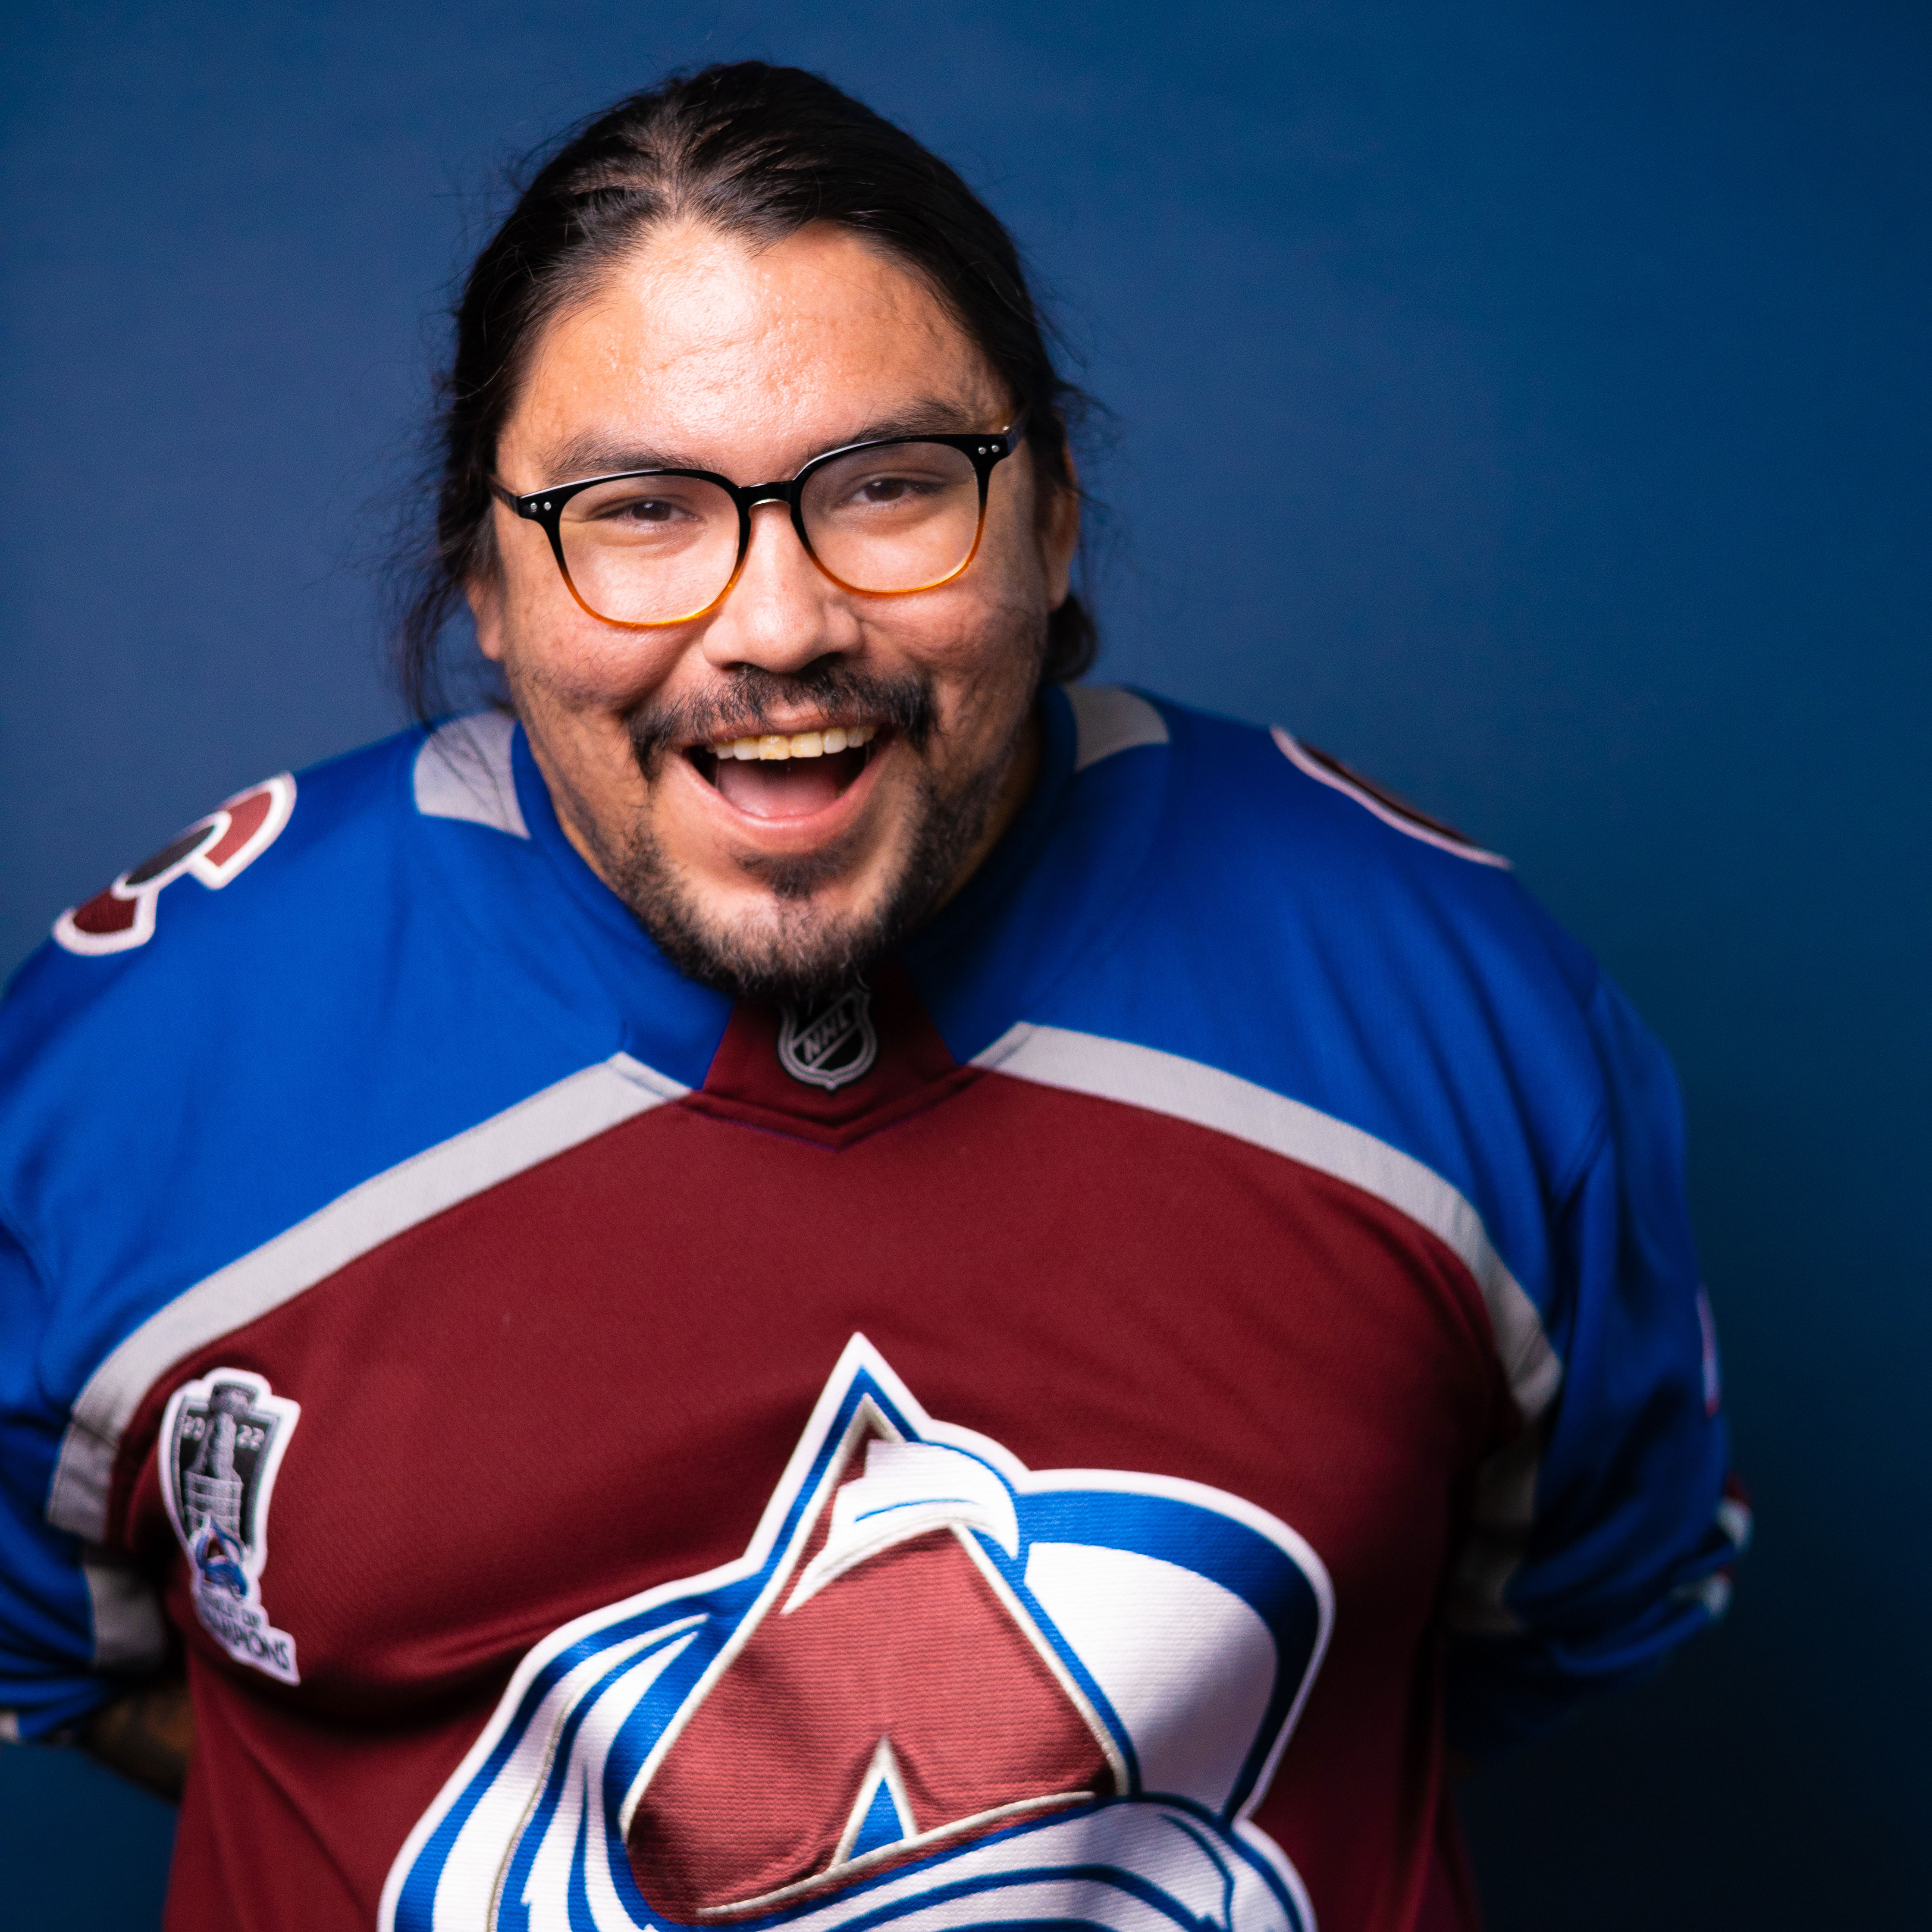 Joshua Emerson sporting an avs jersey and smiling big.